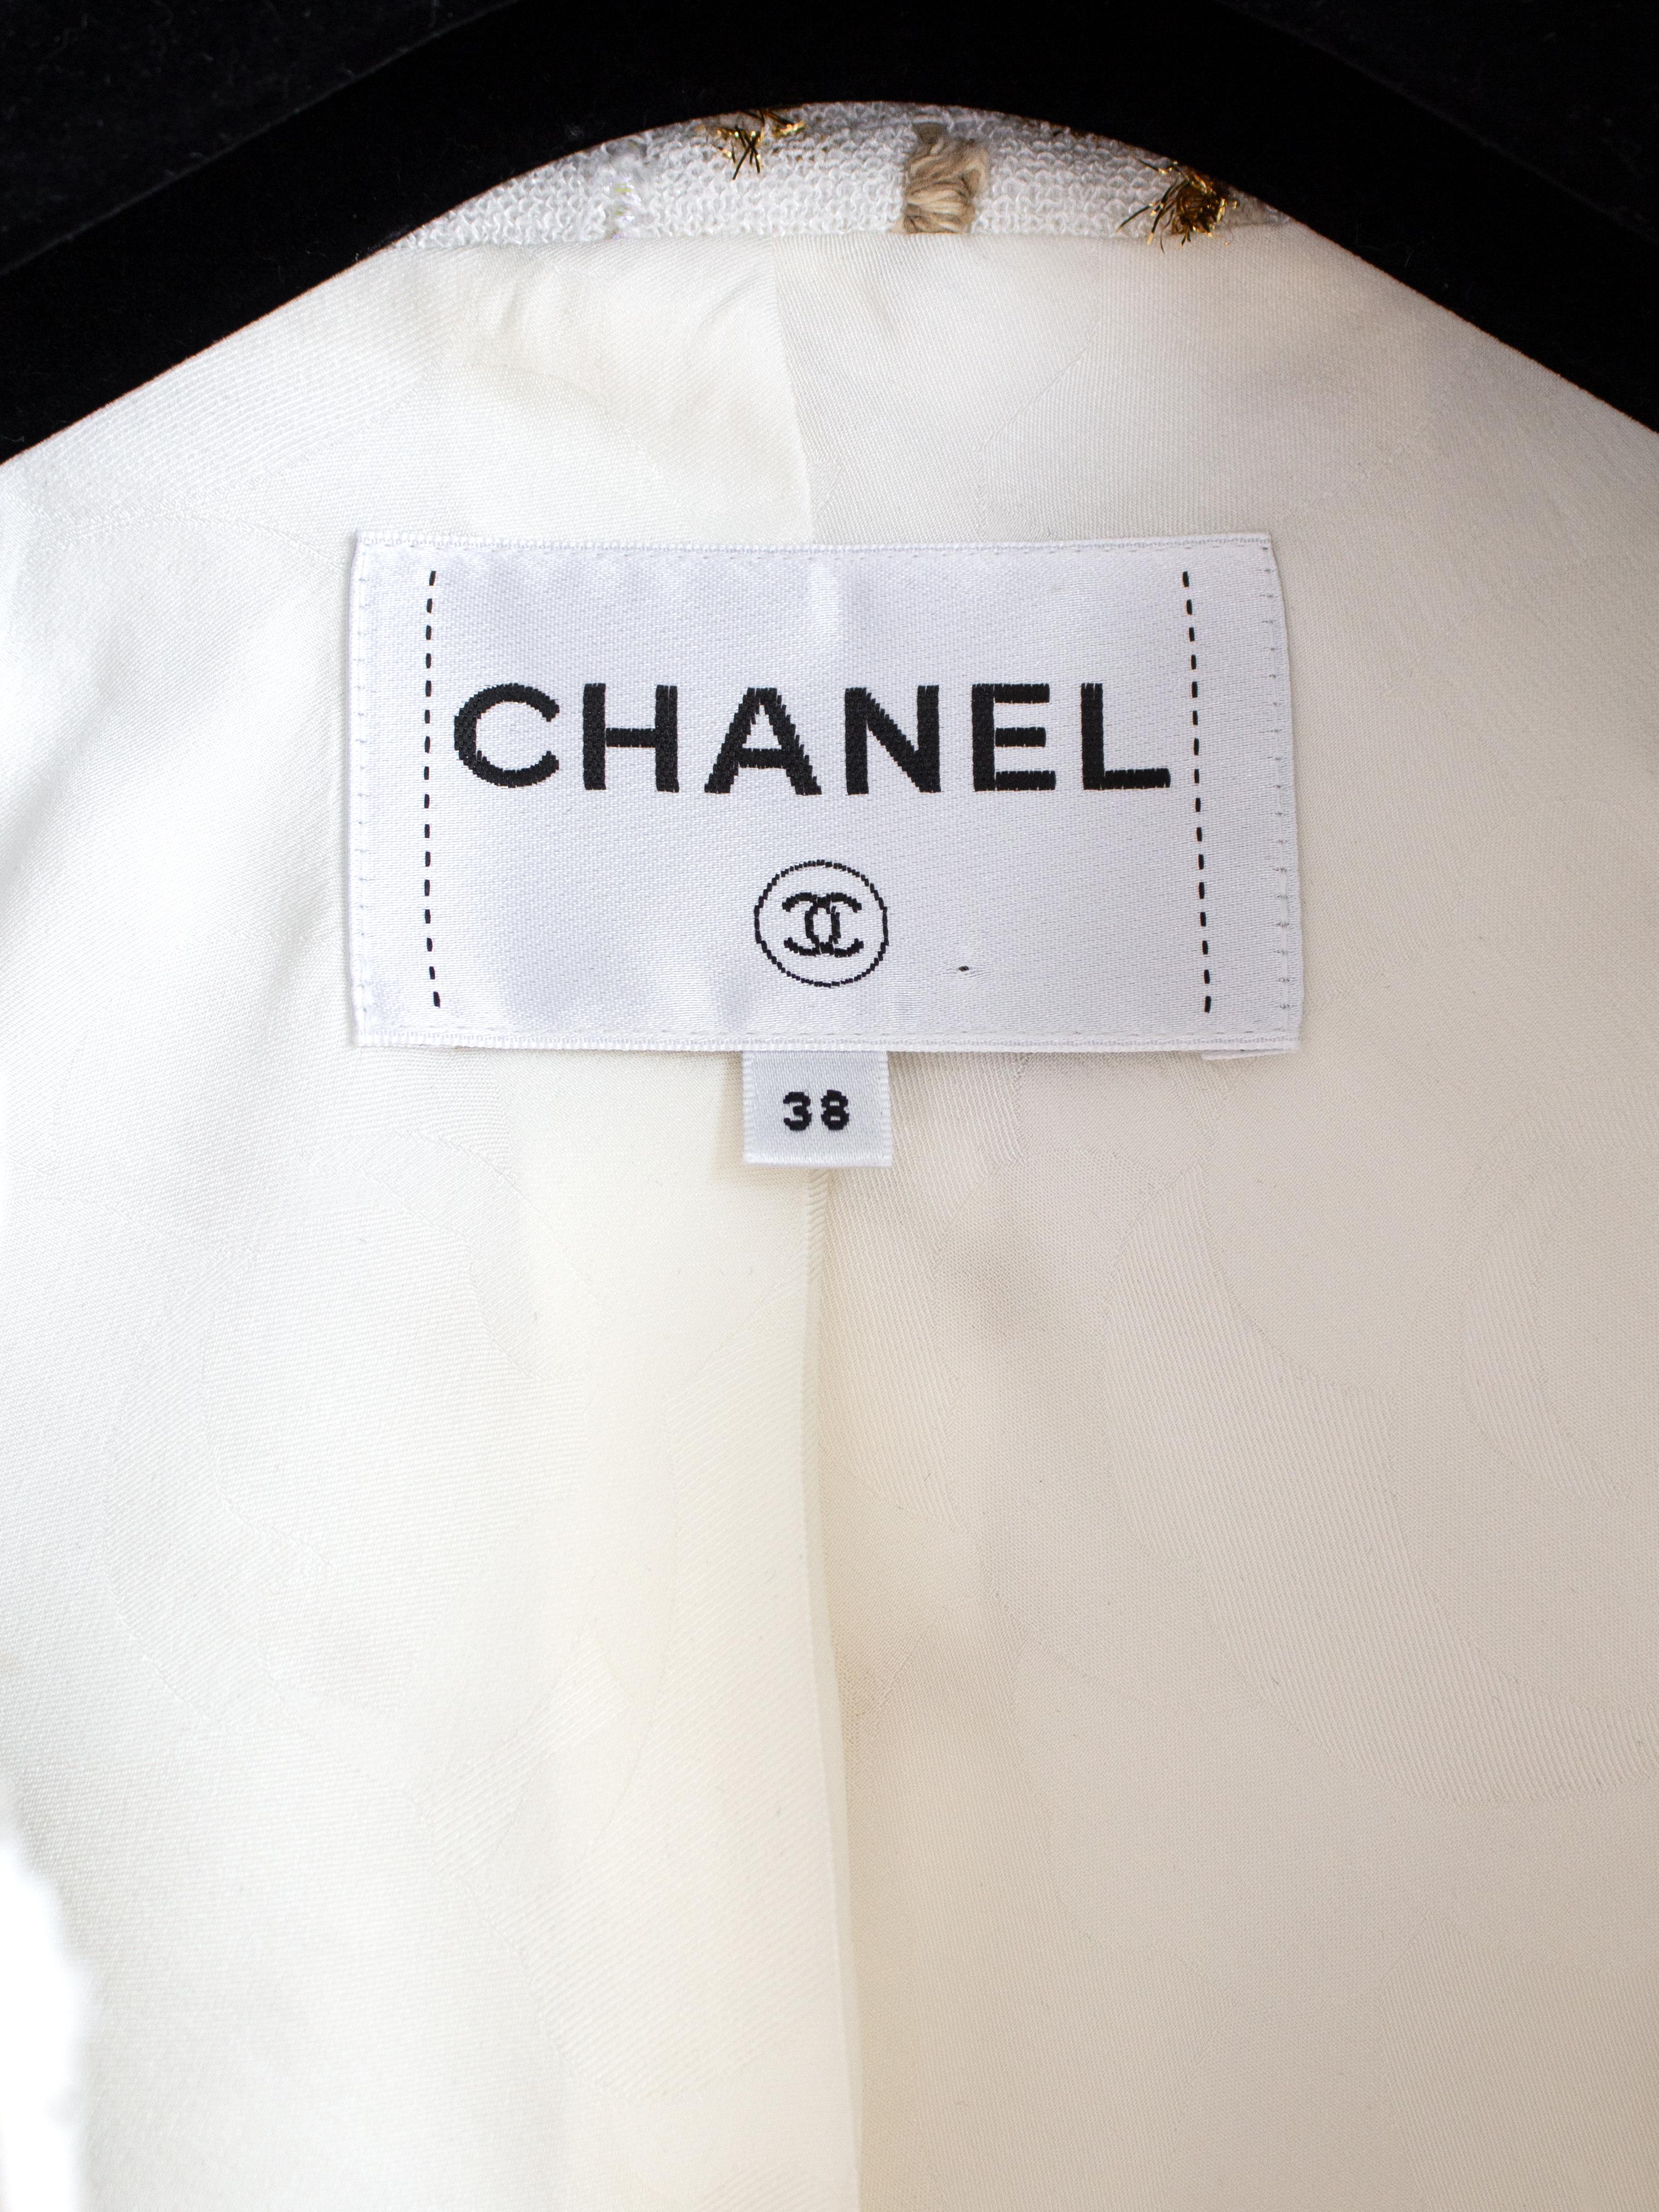 Chanel S/S 2019 By The Sea White Gold Black Bow Embellished 19P 19S Jacket  4